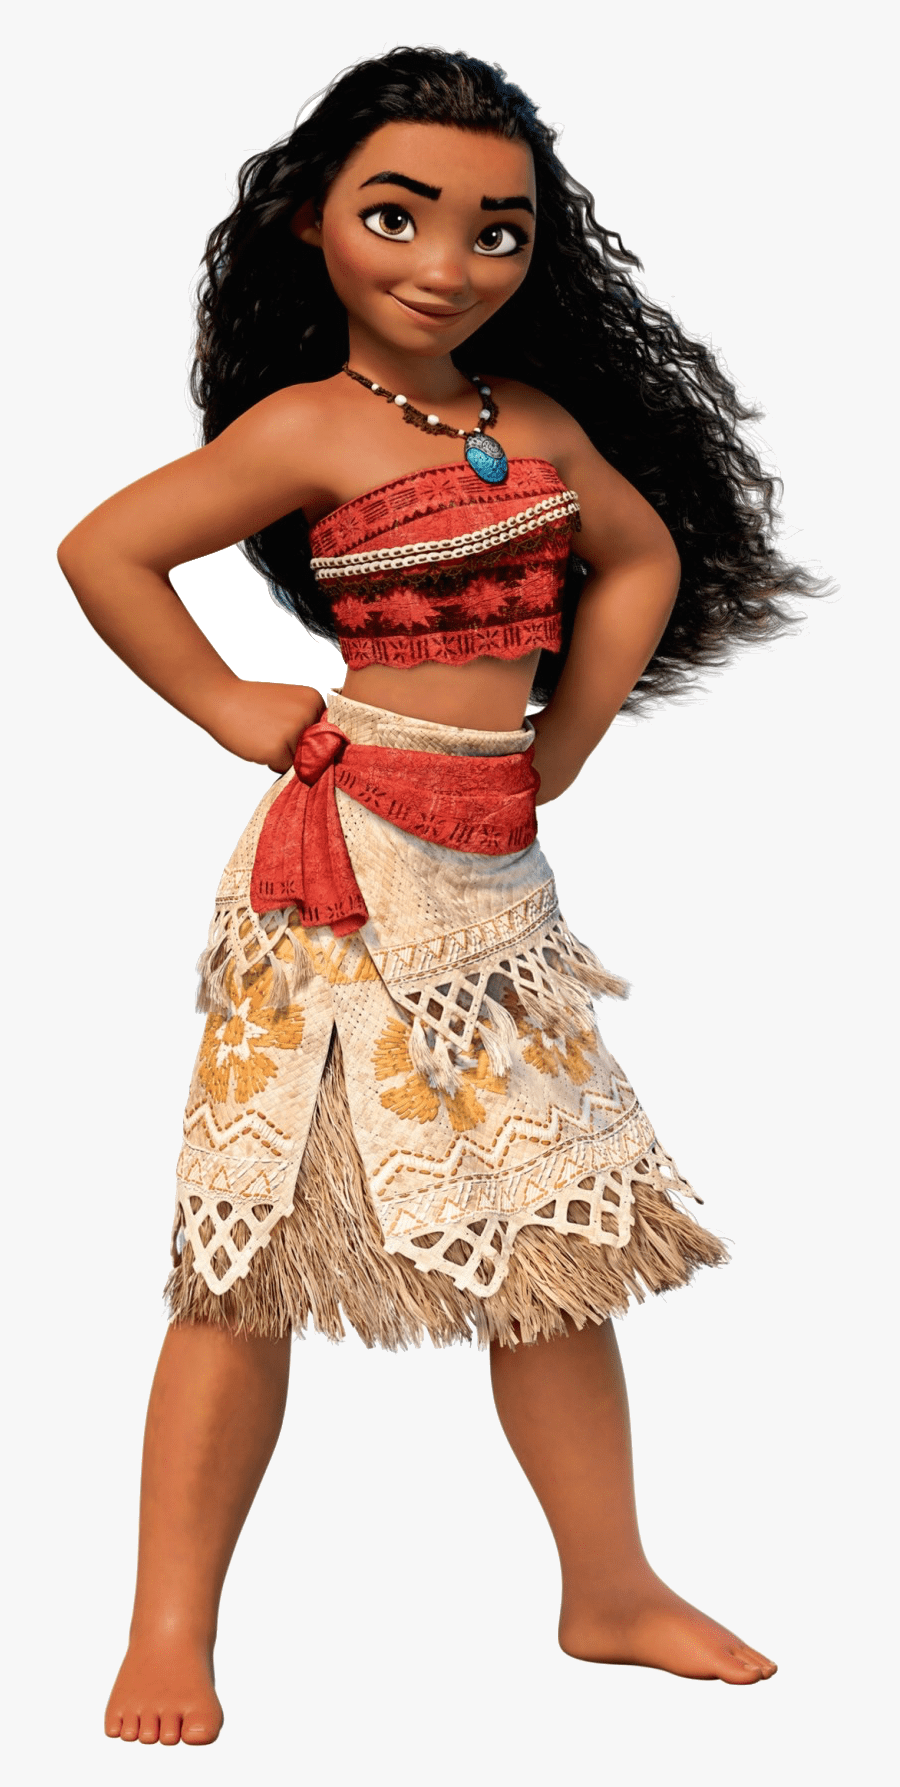 Moana Free Clipart Clip Art On Transparent Png - Moana Princess, Transparent Clipart